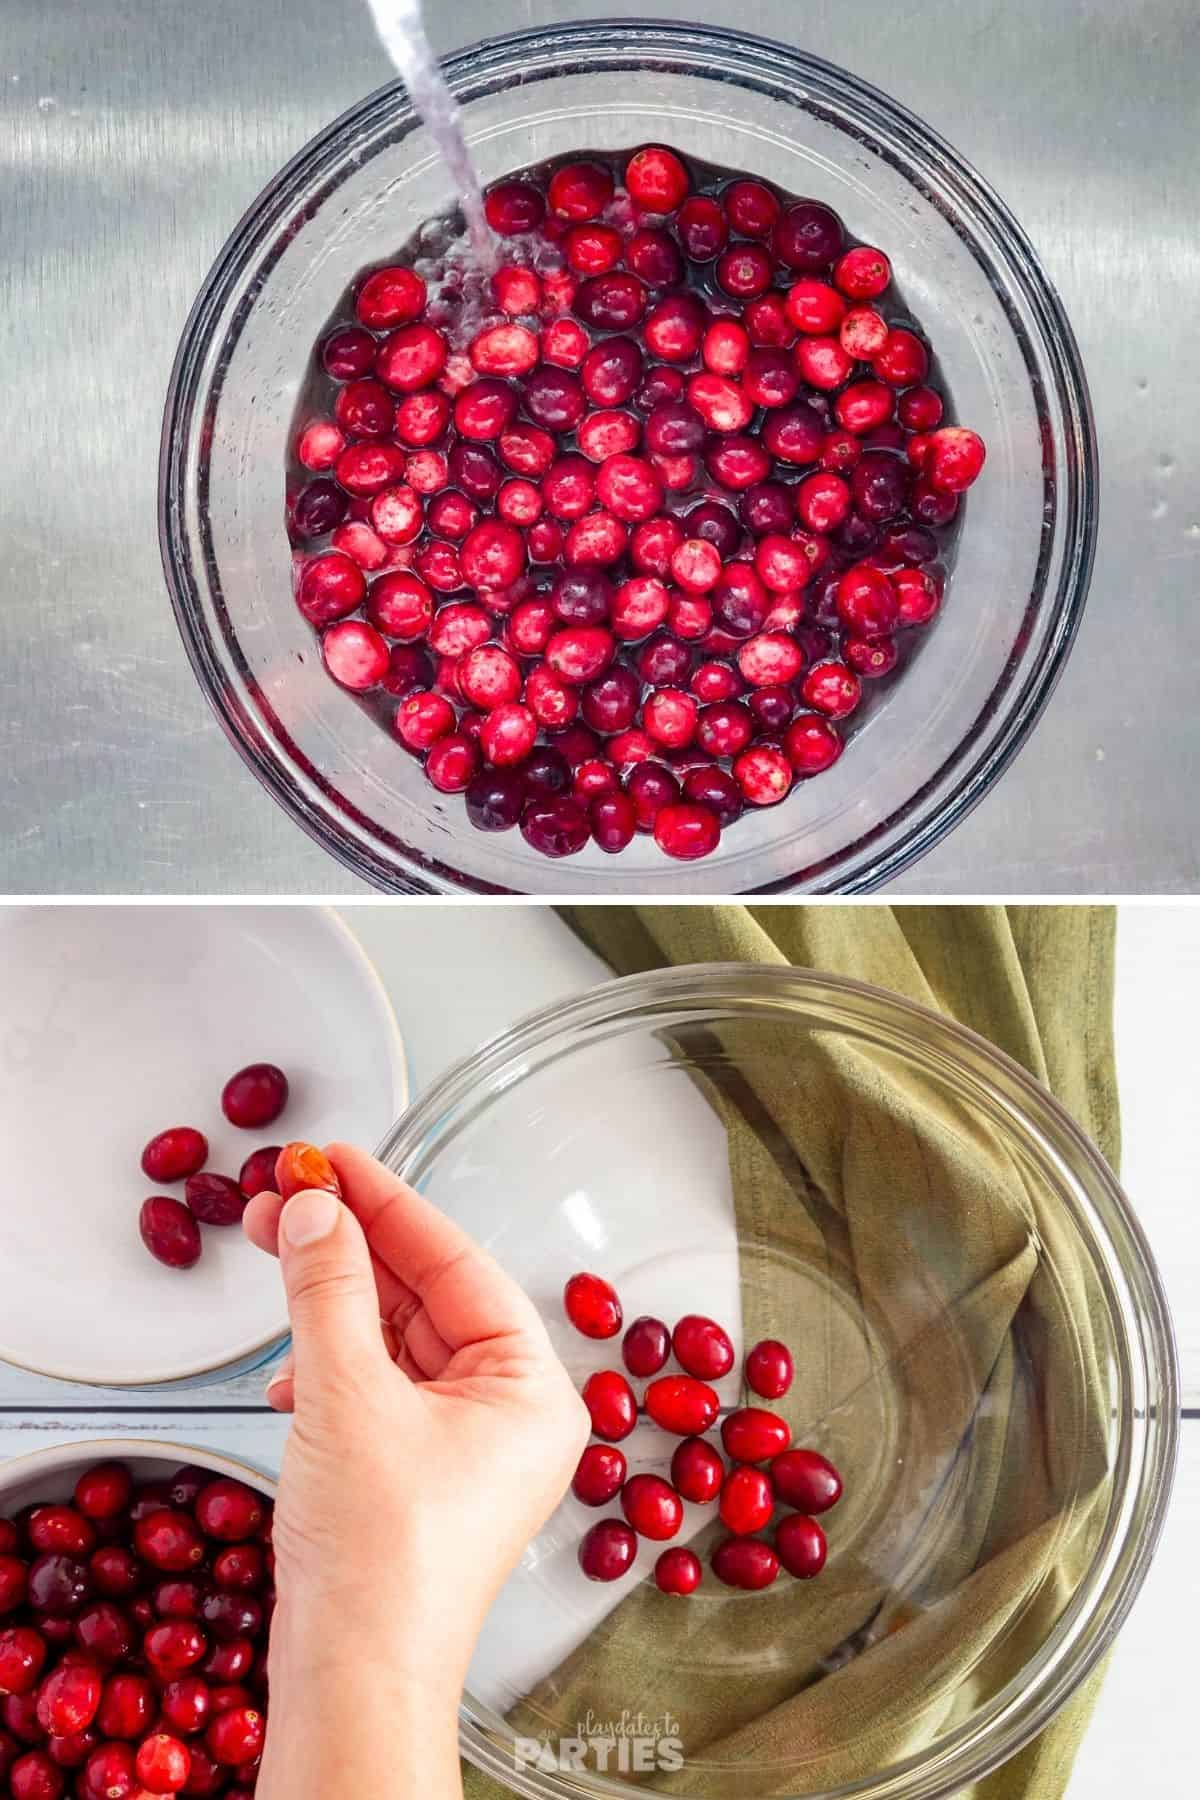 Rinsing and separating fresh cranberries before cooking.